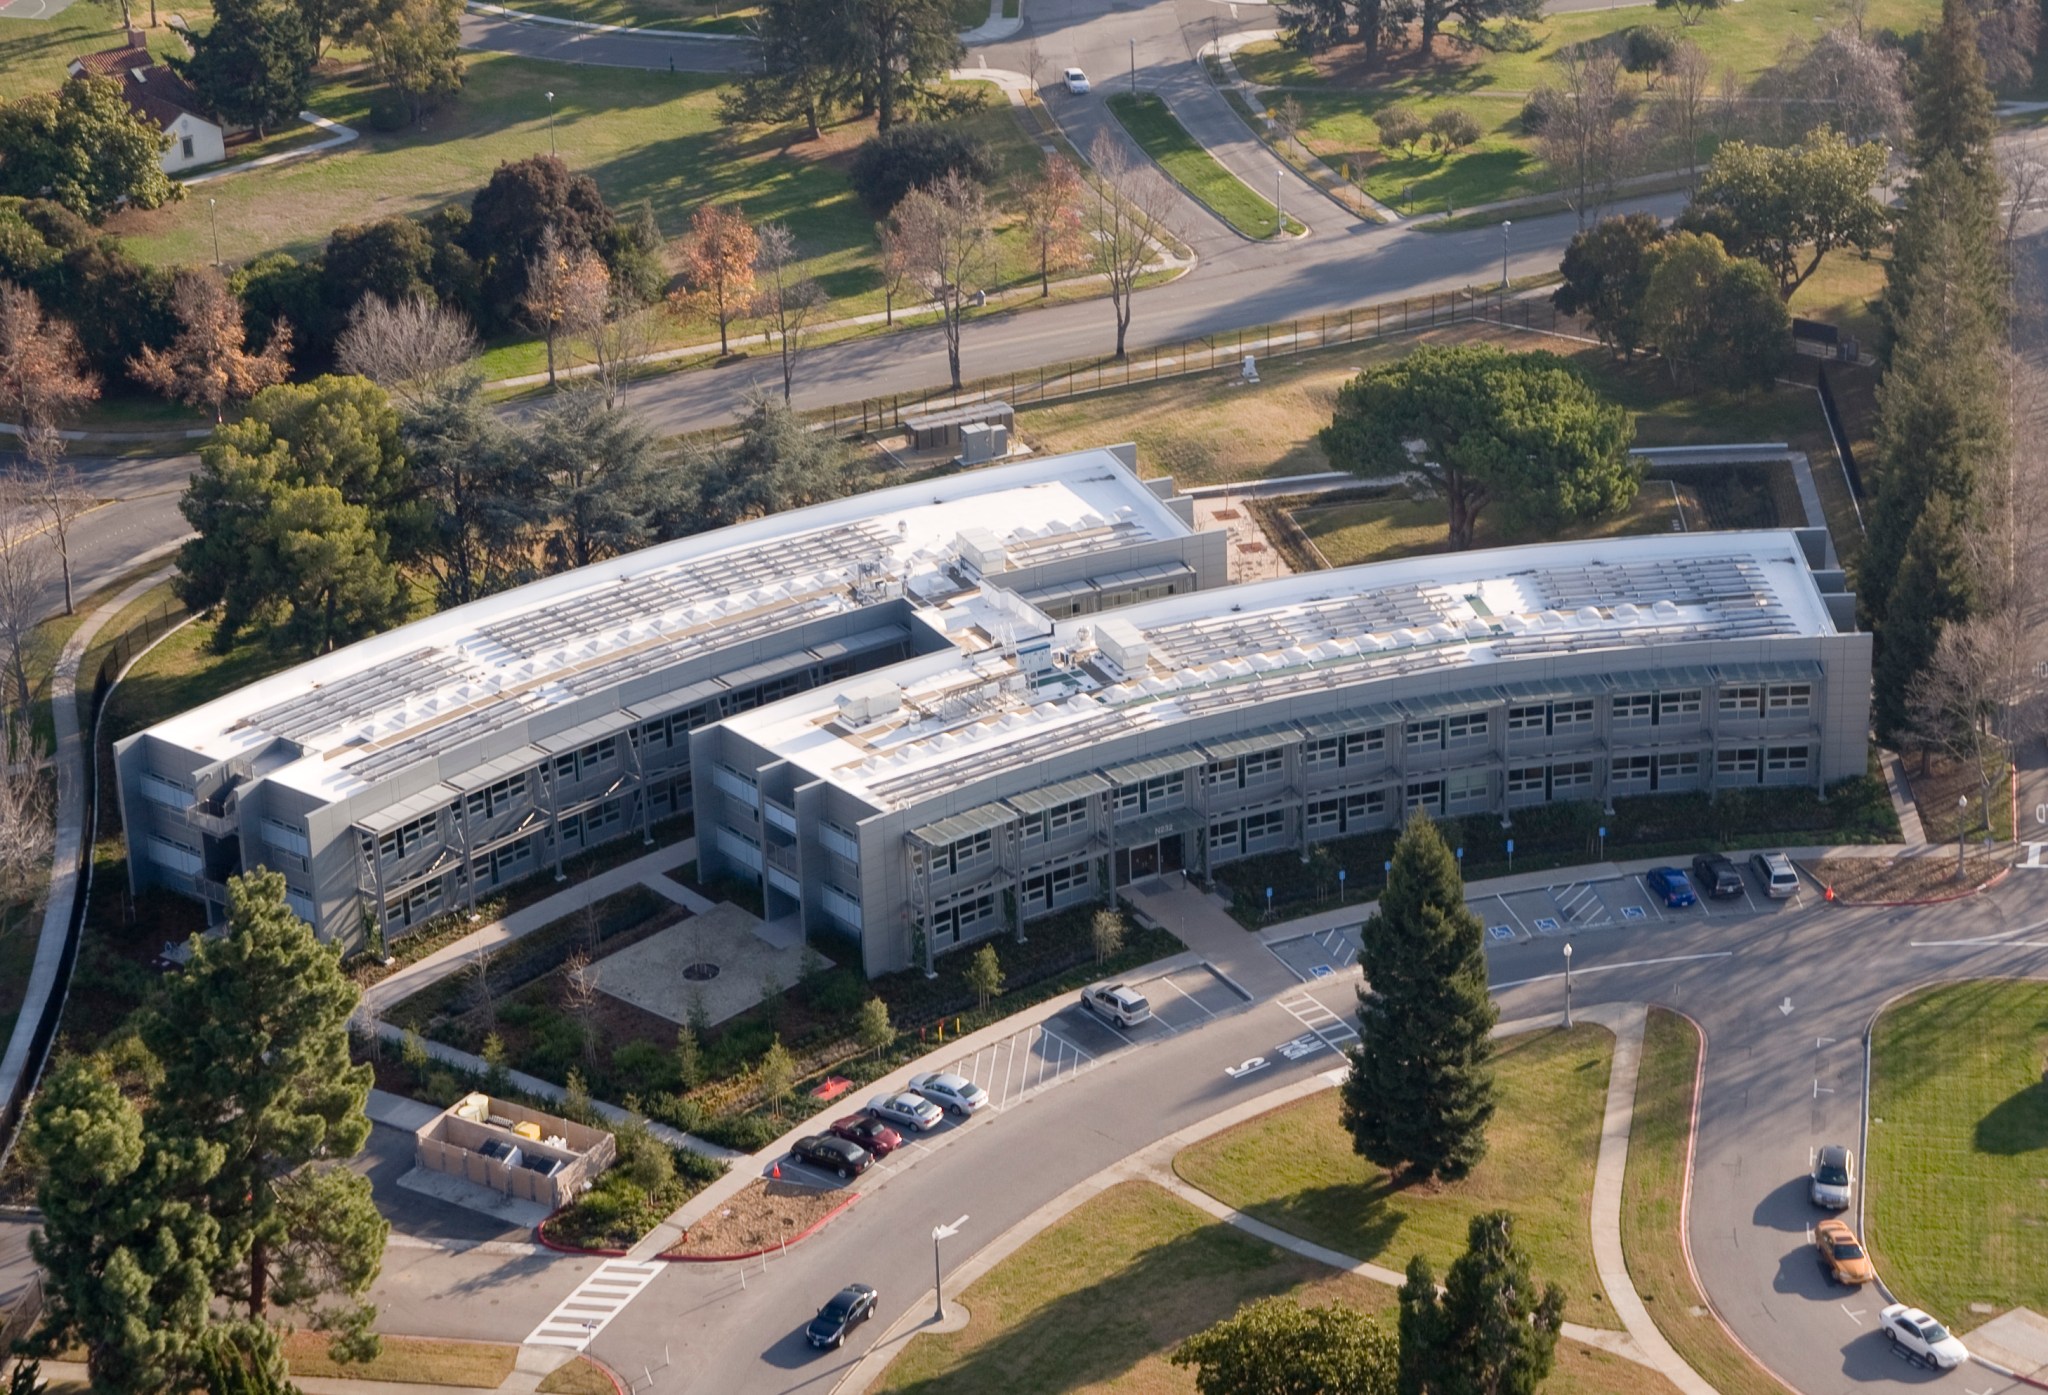 An aerial view of Sustainability Base at NASA’s Ames Research Center in California’s Silicon Valley